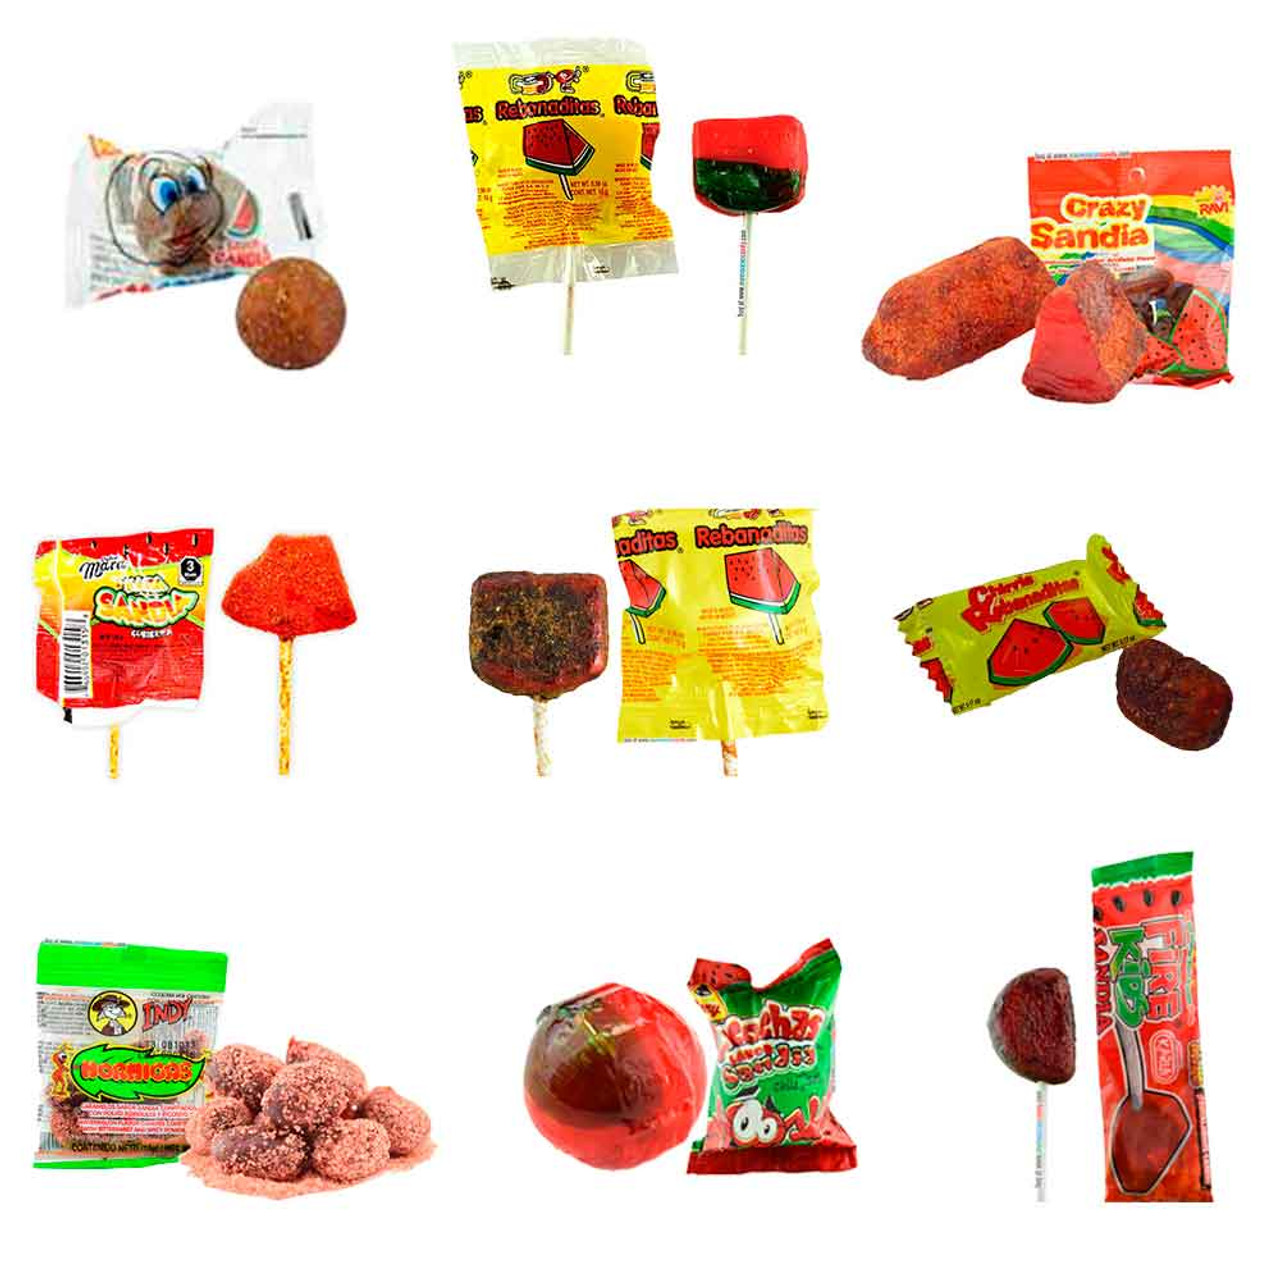 Sweet Candy Mexican Candy